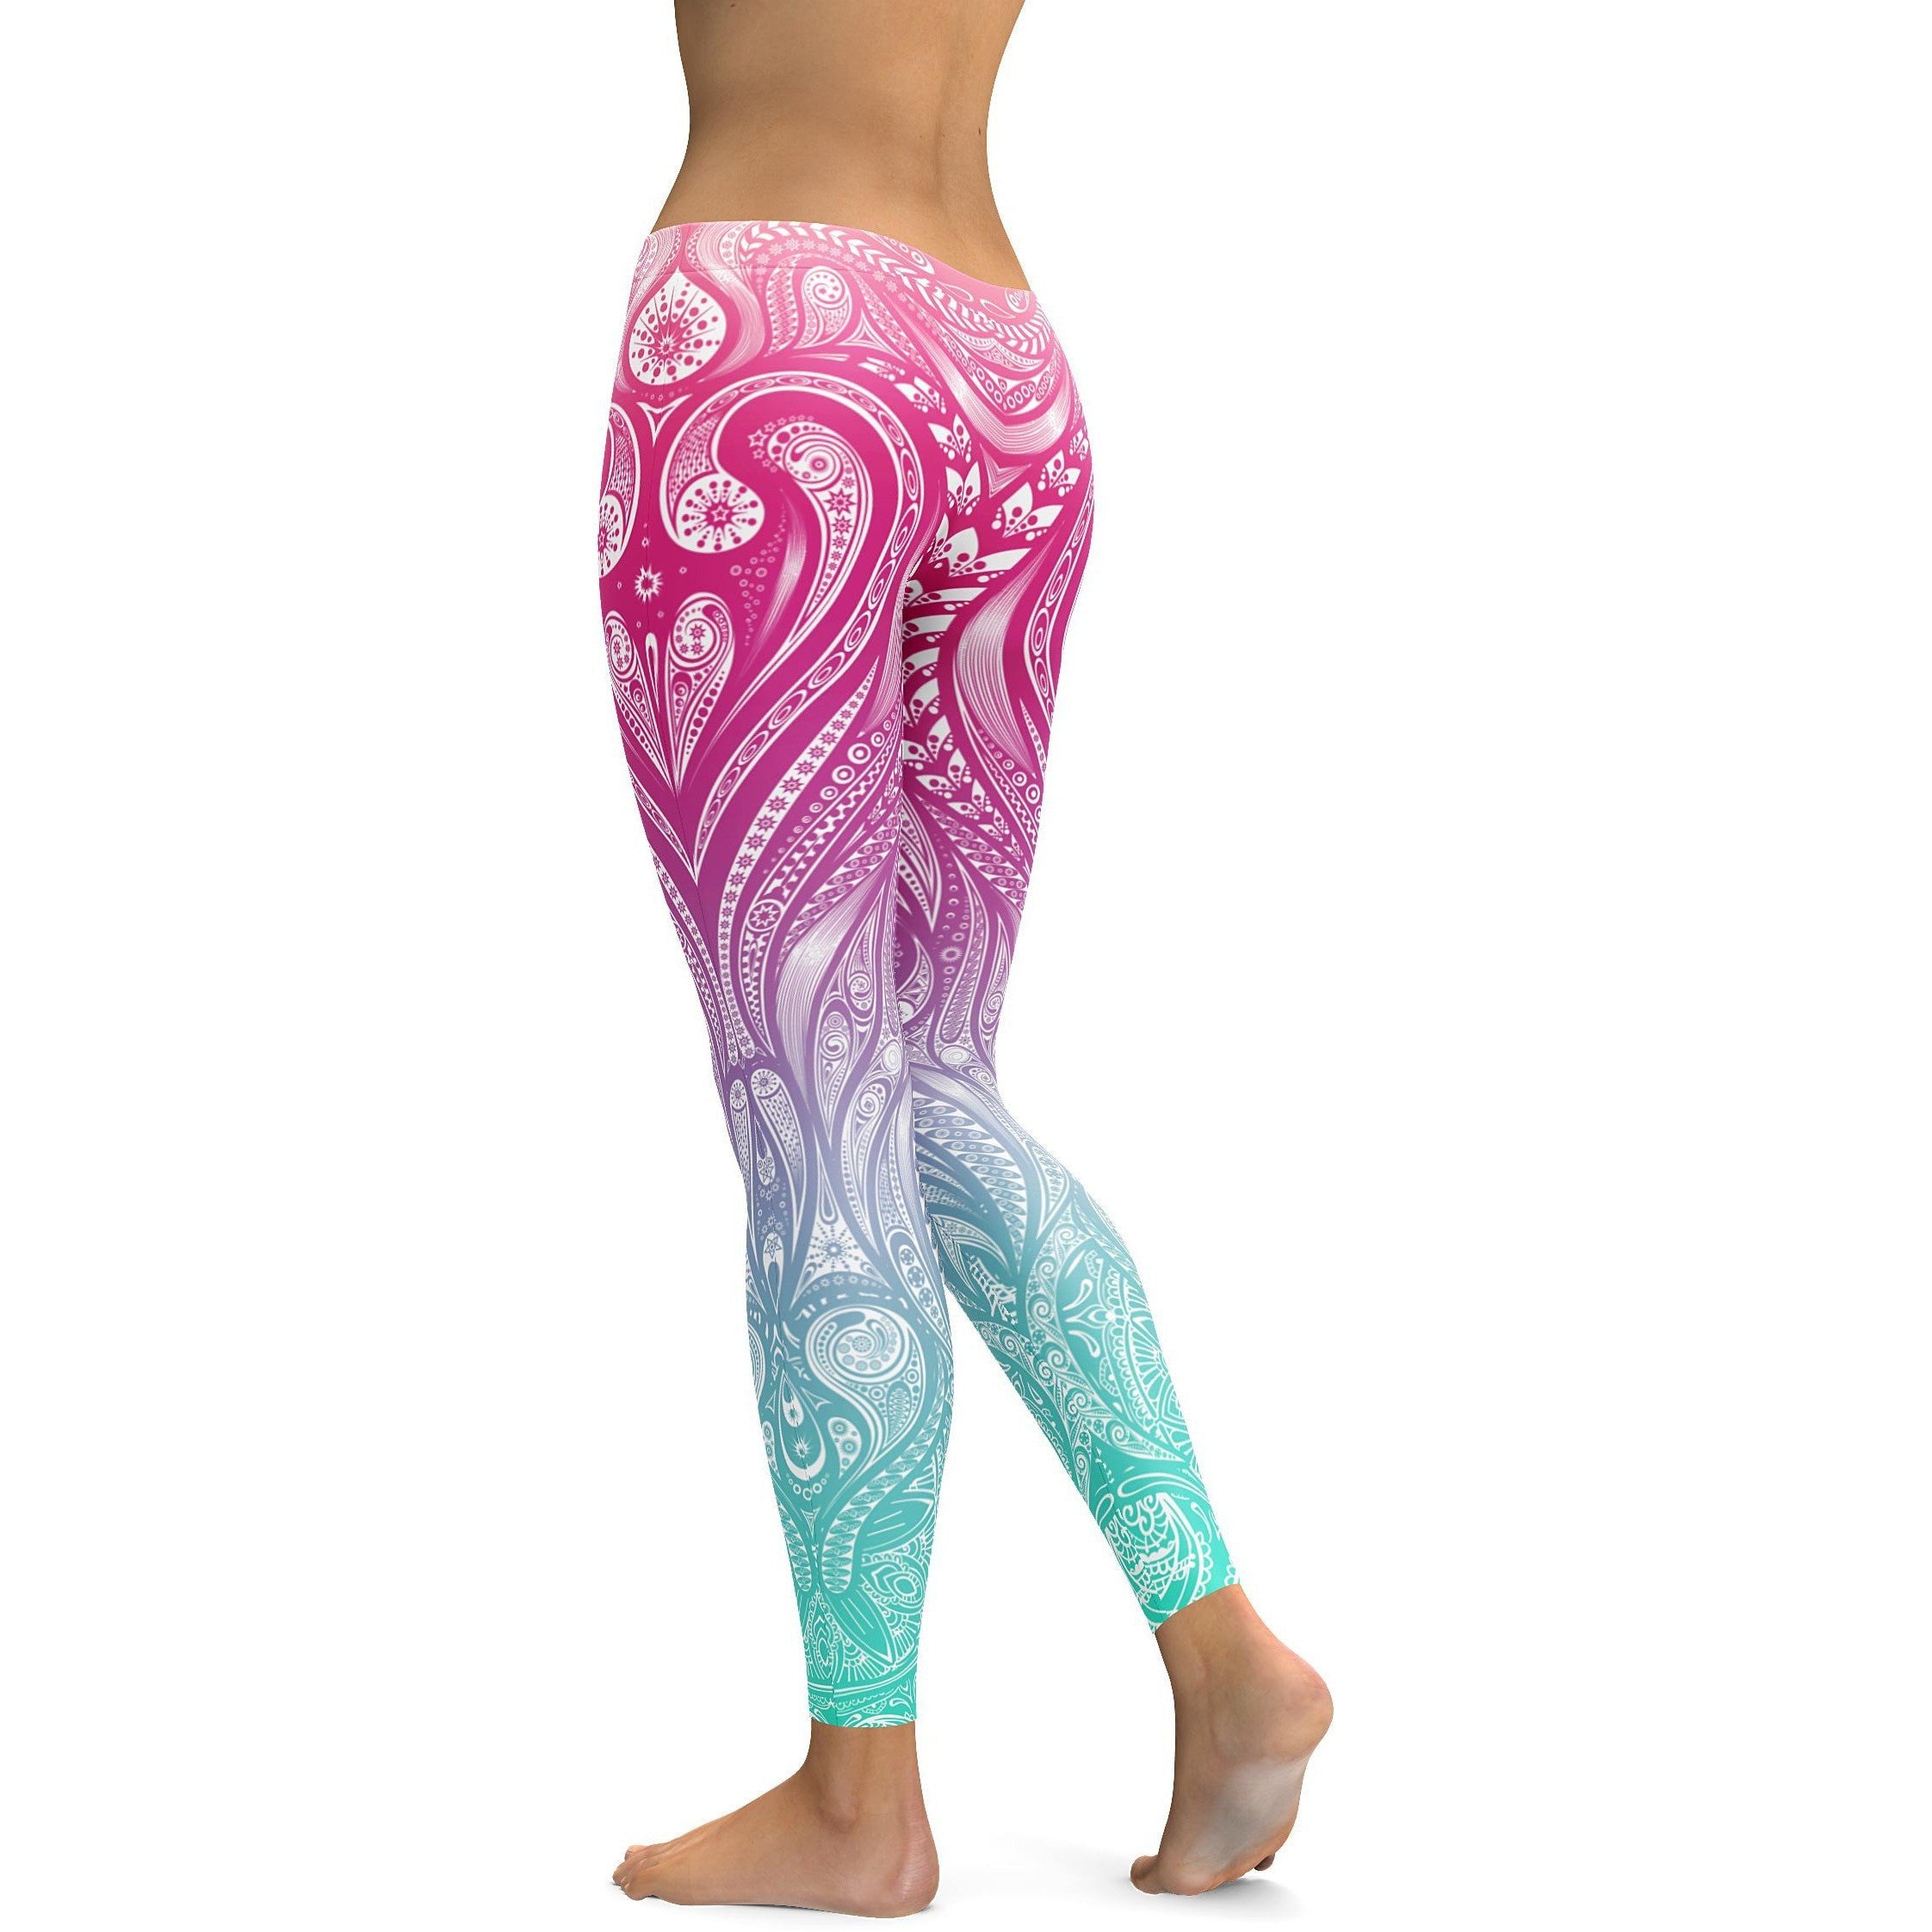 Bright Ornament Pattern Leggings for women with dazzling colors